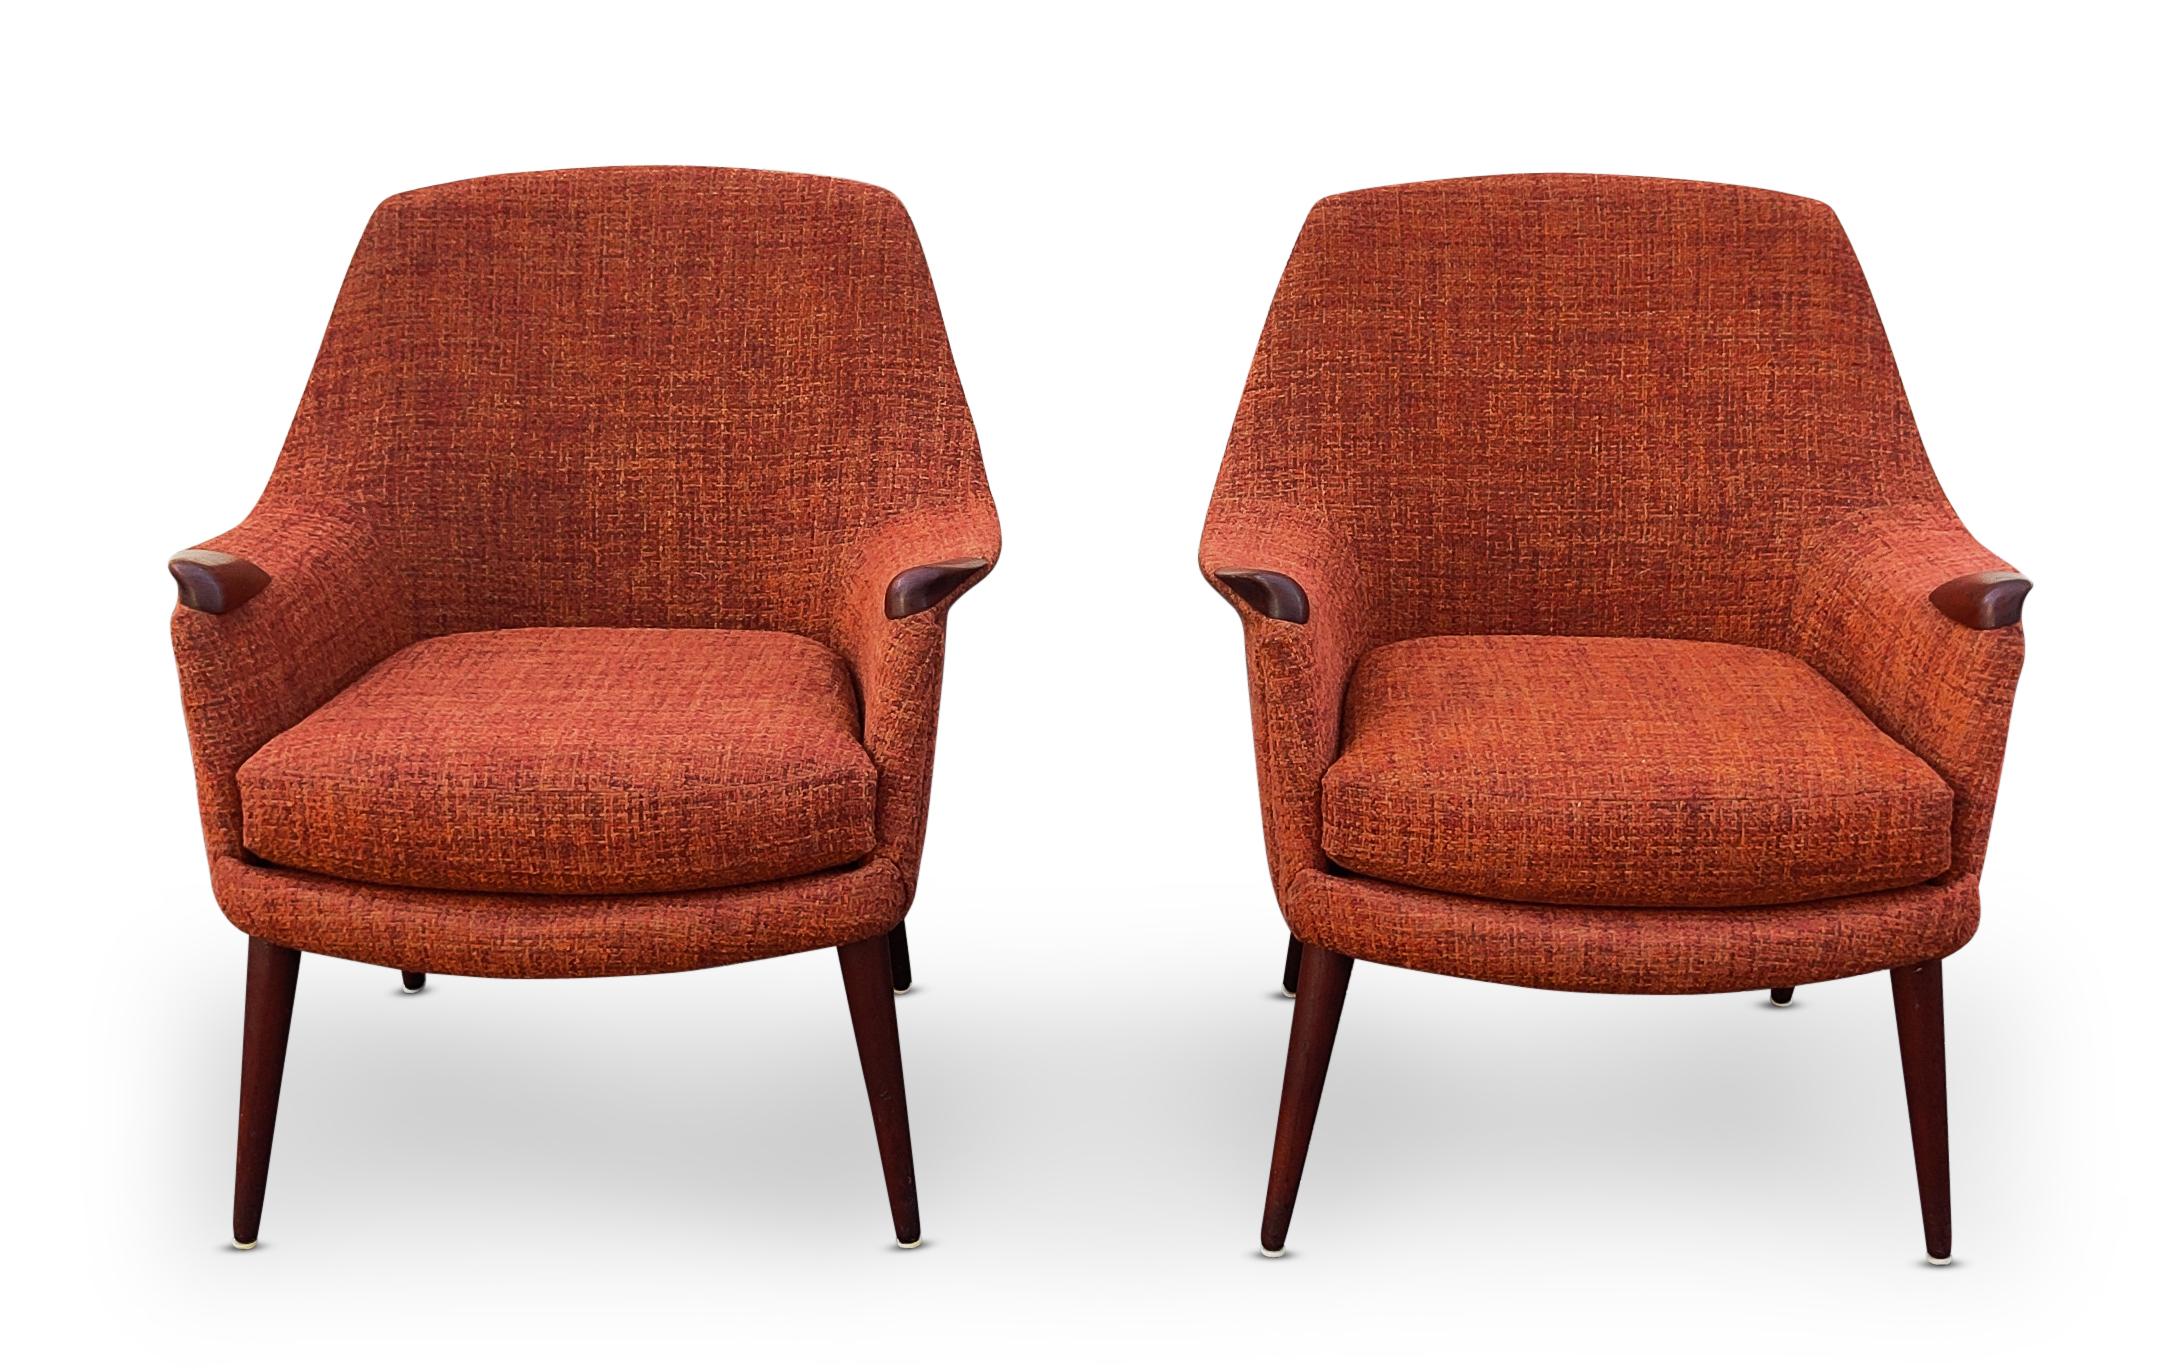 For your consideration, a pair of Danish made, Mid-Century Modern, 1960s, lounge or club chairs in the Style of Hans Wegner. Notice the careful contouring of every part of these chairs. Sculpted teak hand-rests. Tapering and angled vteak legs.